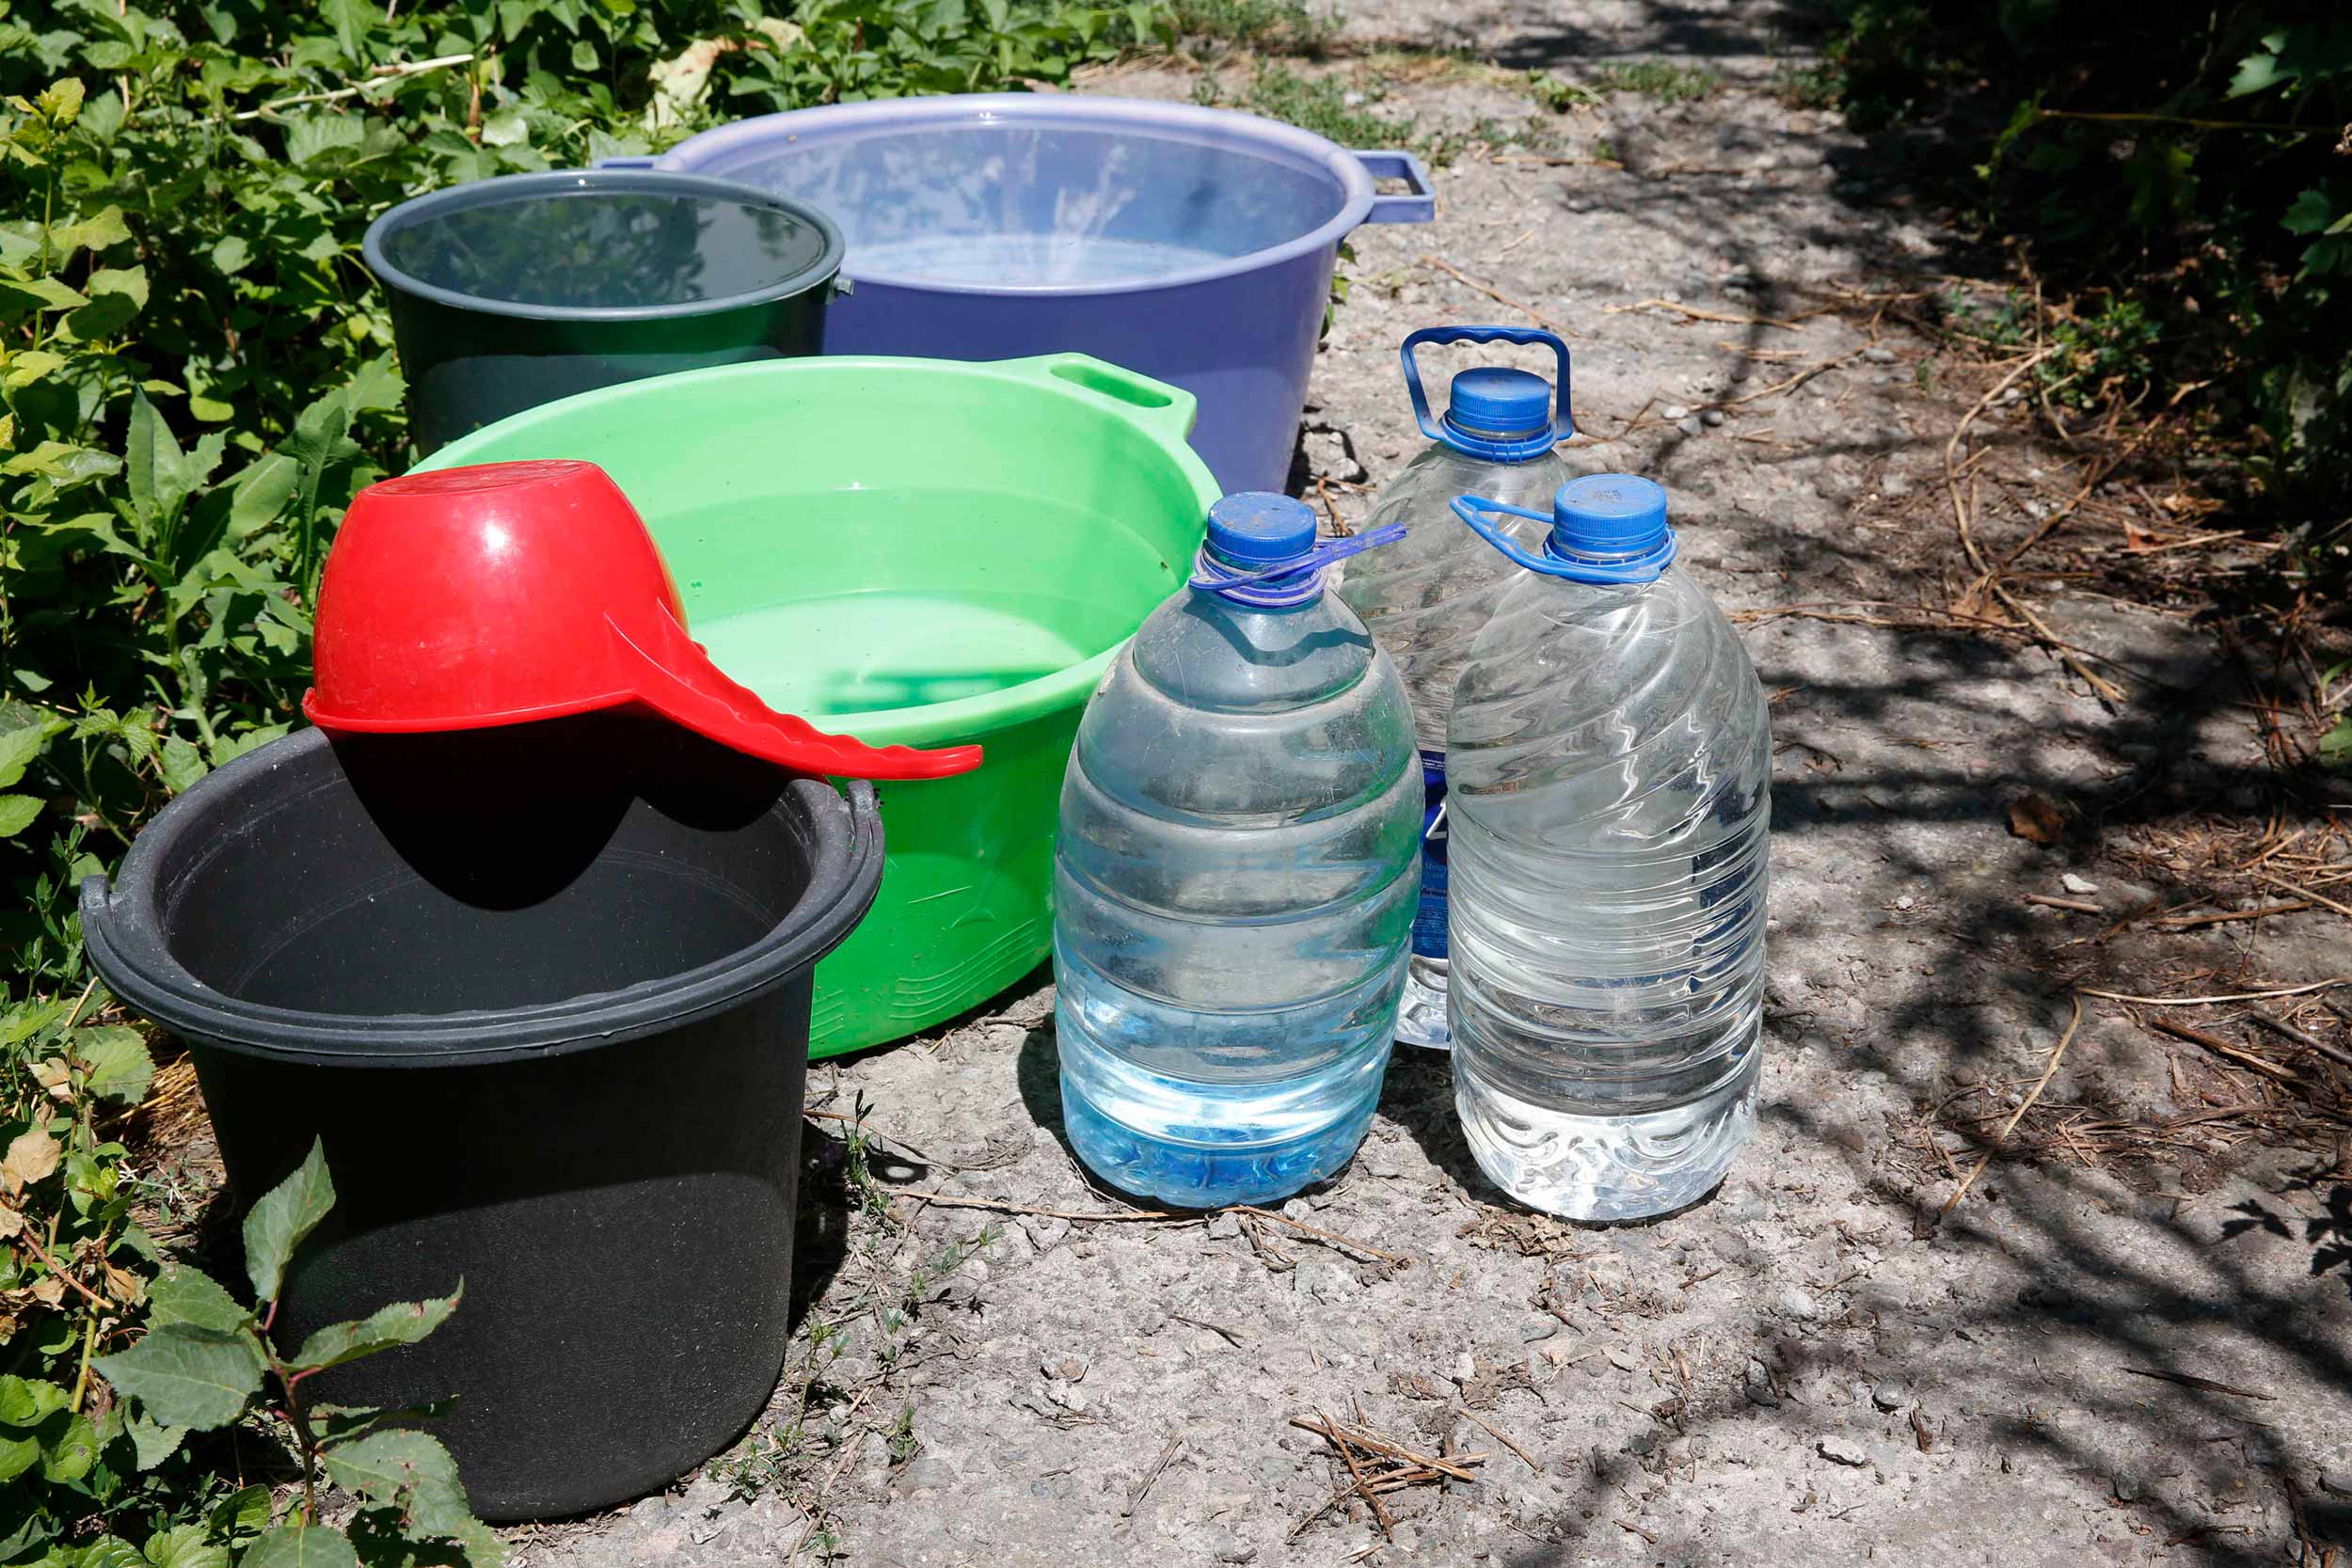 Residents in Bishkek have been piling water bottles as water shortages have hit Kyrgyzstan's capital amid soaring temperatures. Experts maintain that while climate change aggravates water problems in the central Asian country, the underlying problem is poor management. © IWPR Central Asia